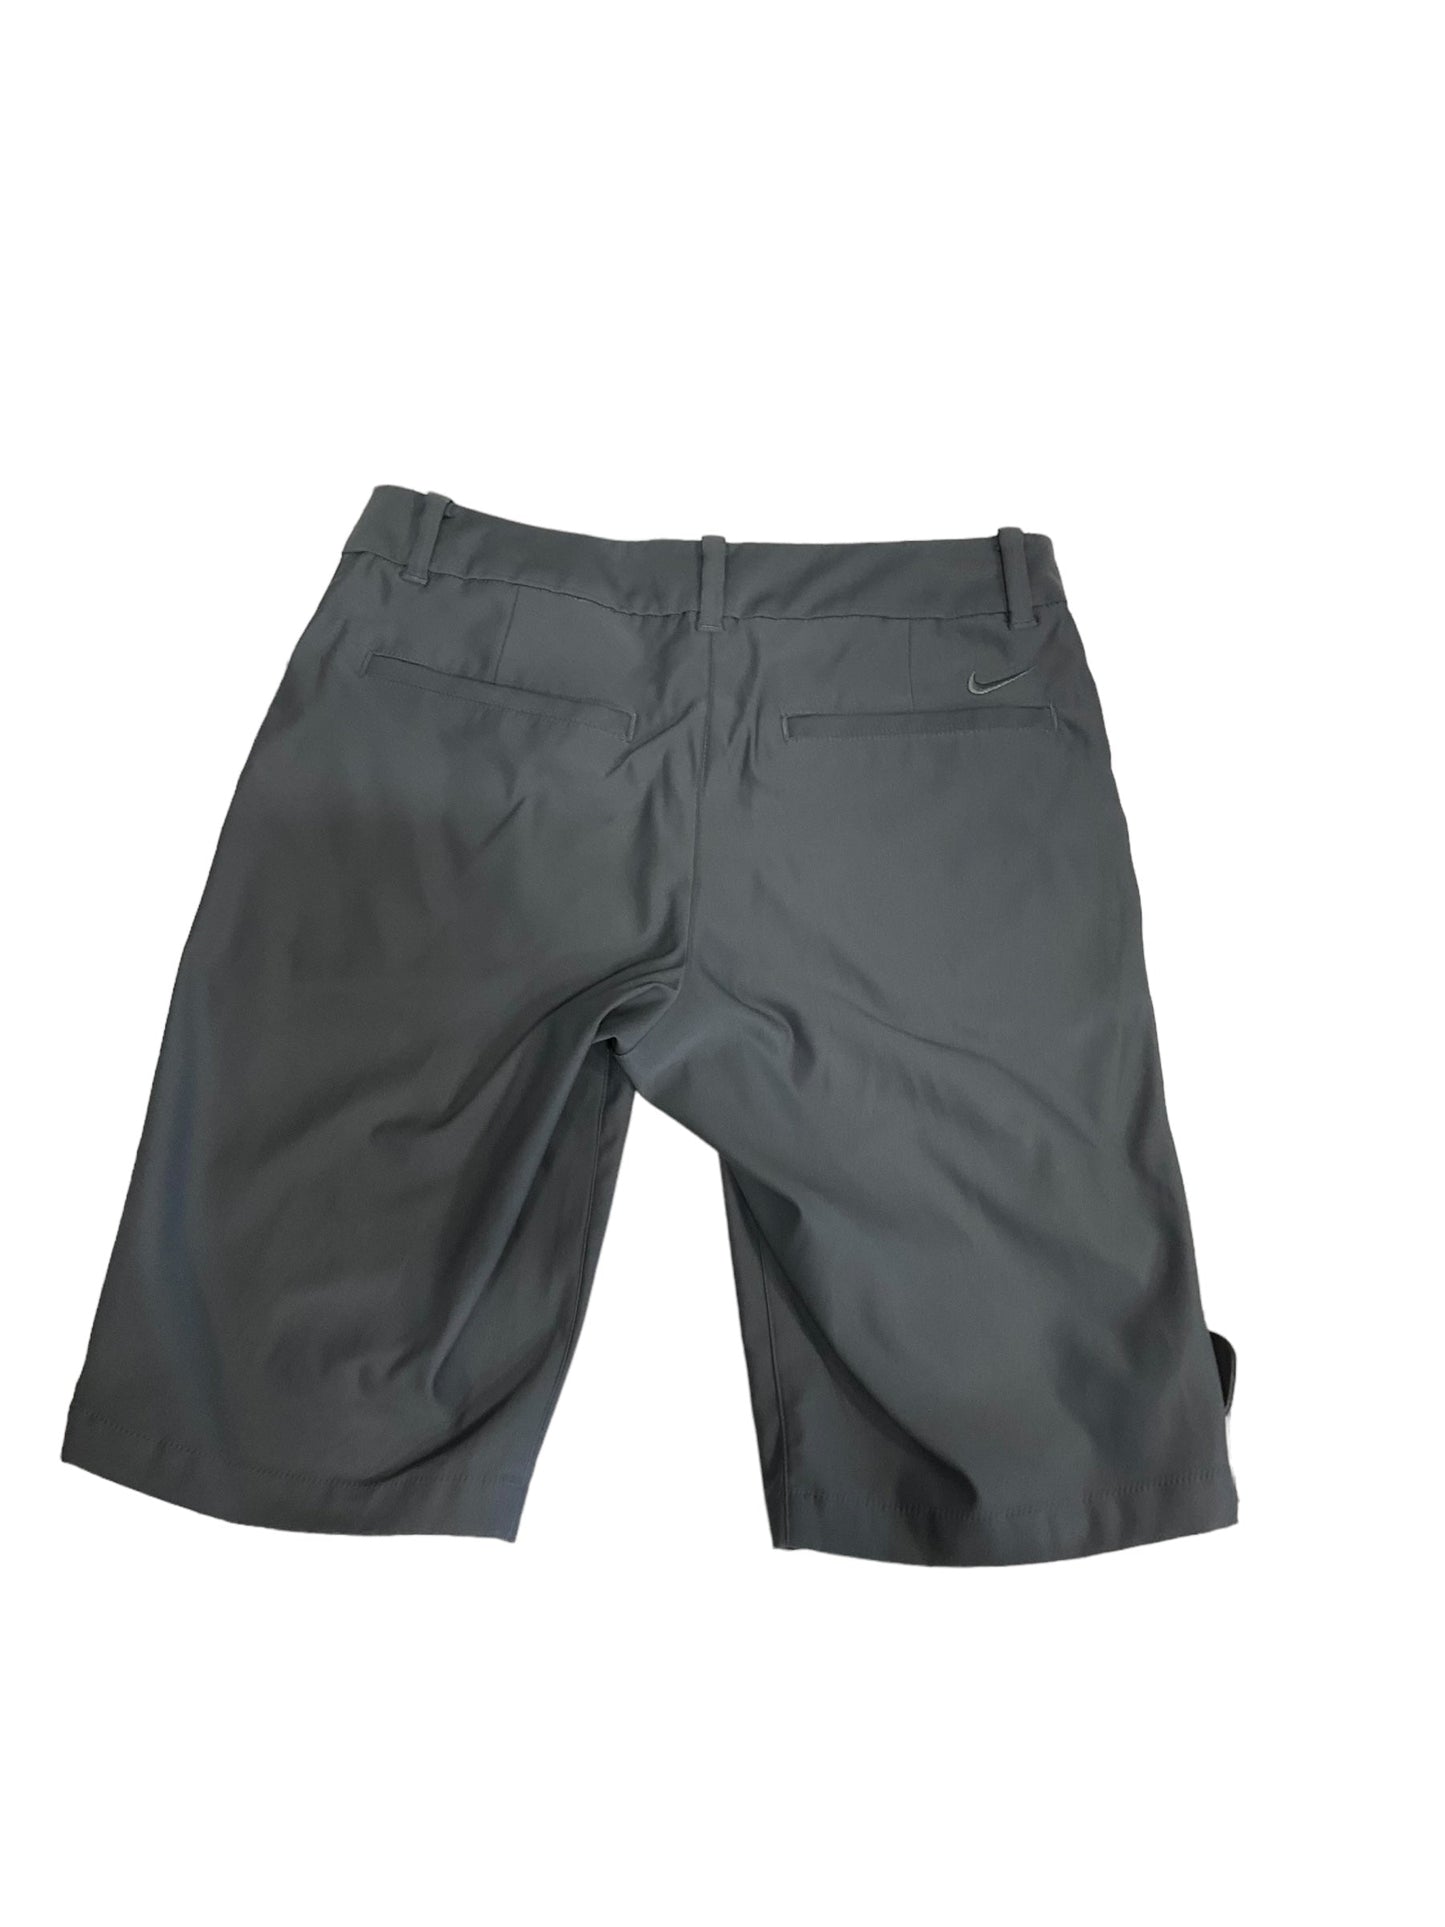 Shorts By Nike  Size: 2